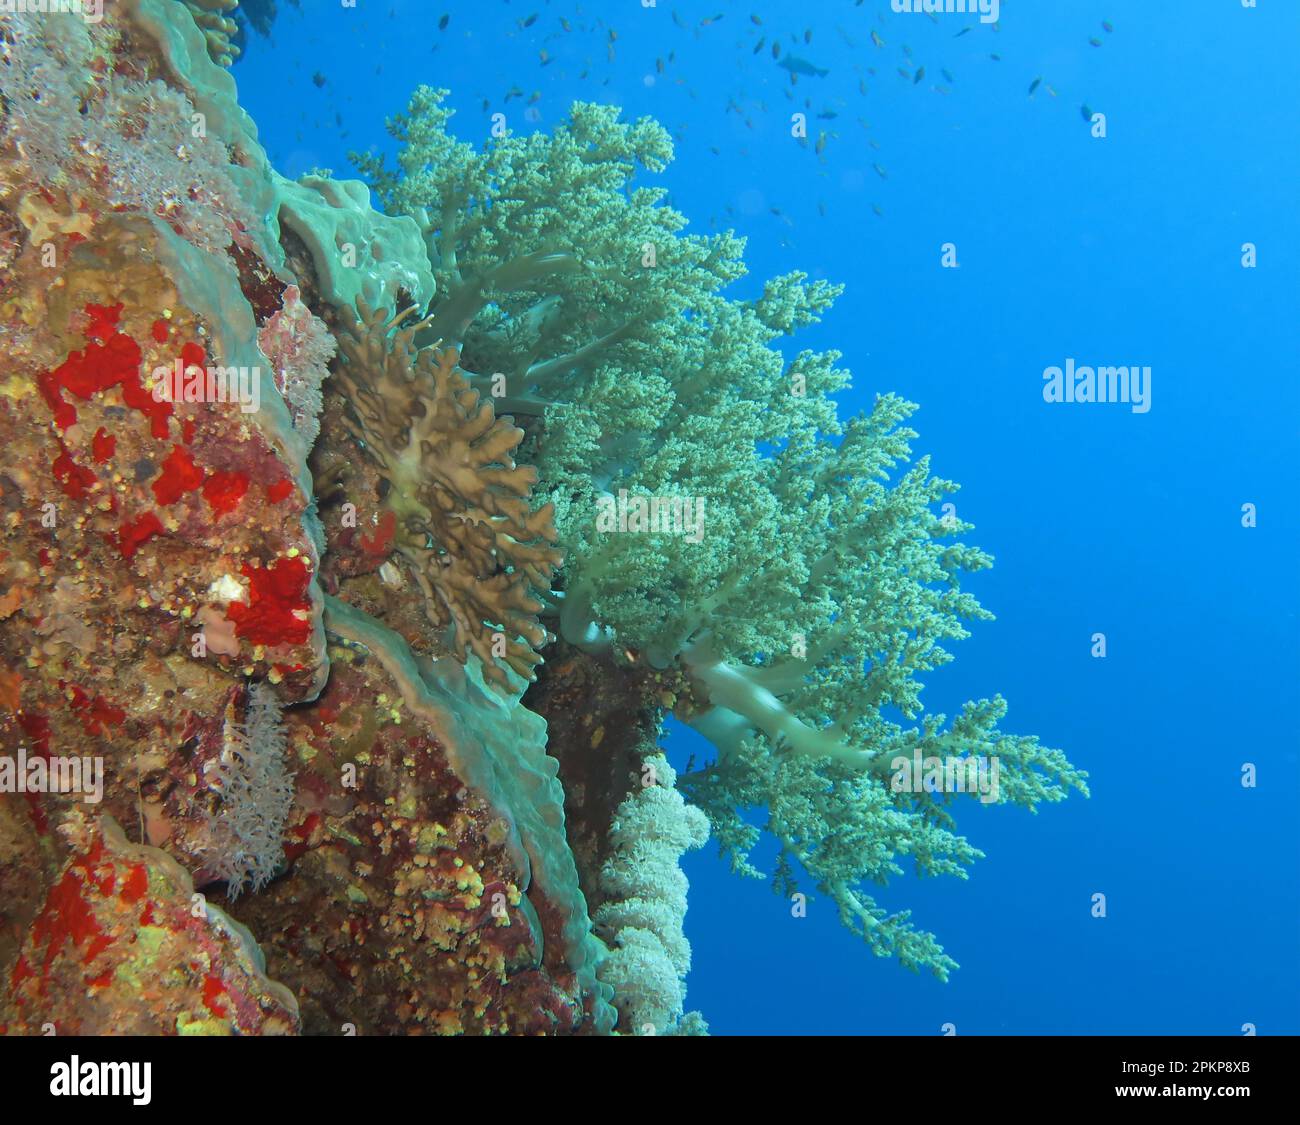 Broccoli Coral, Brother Islands, Red Sea, Egypt, Africa Stock Photo